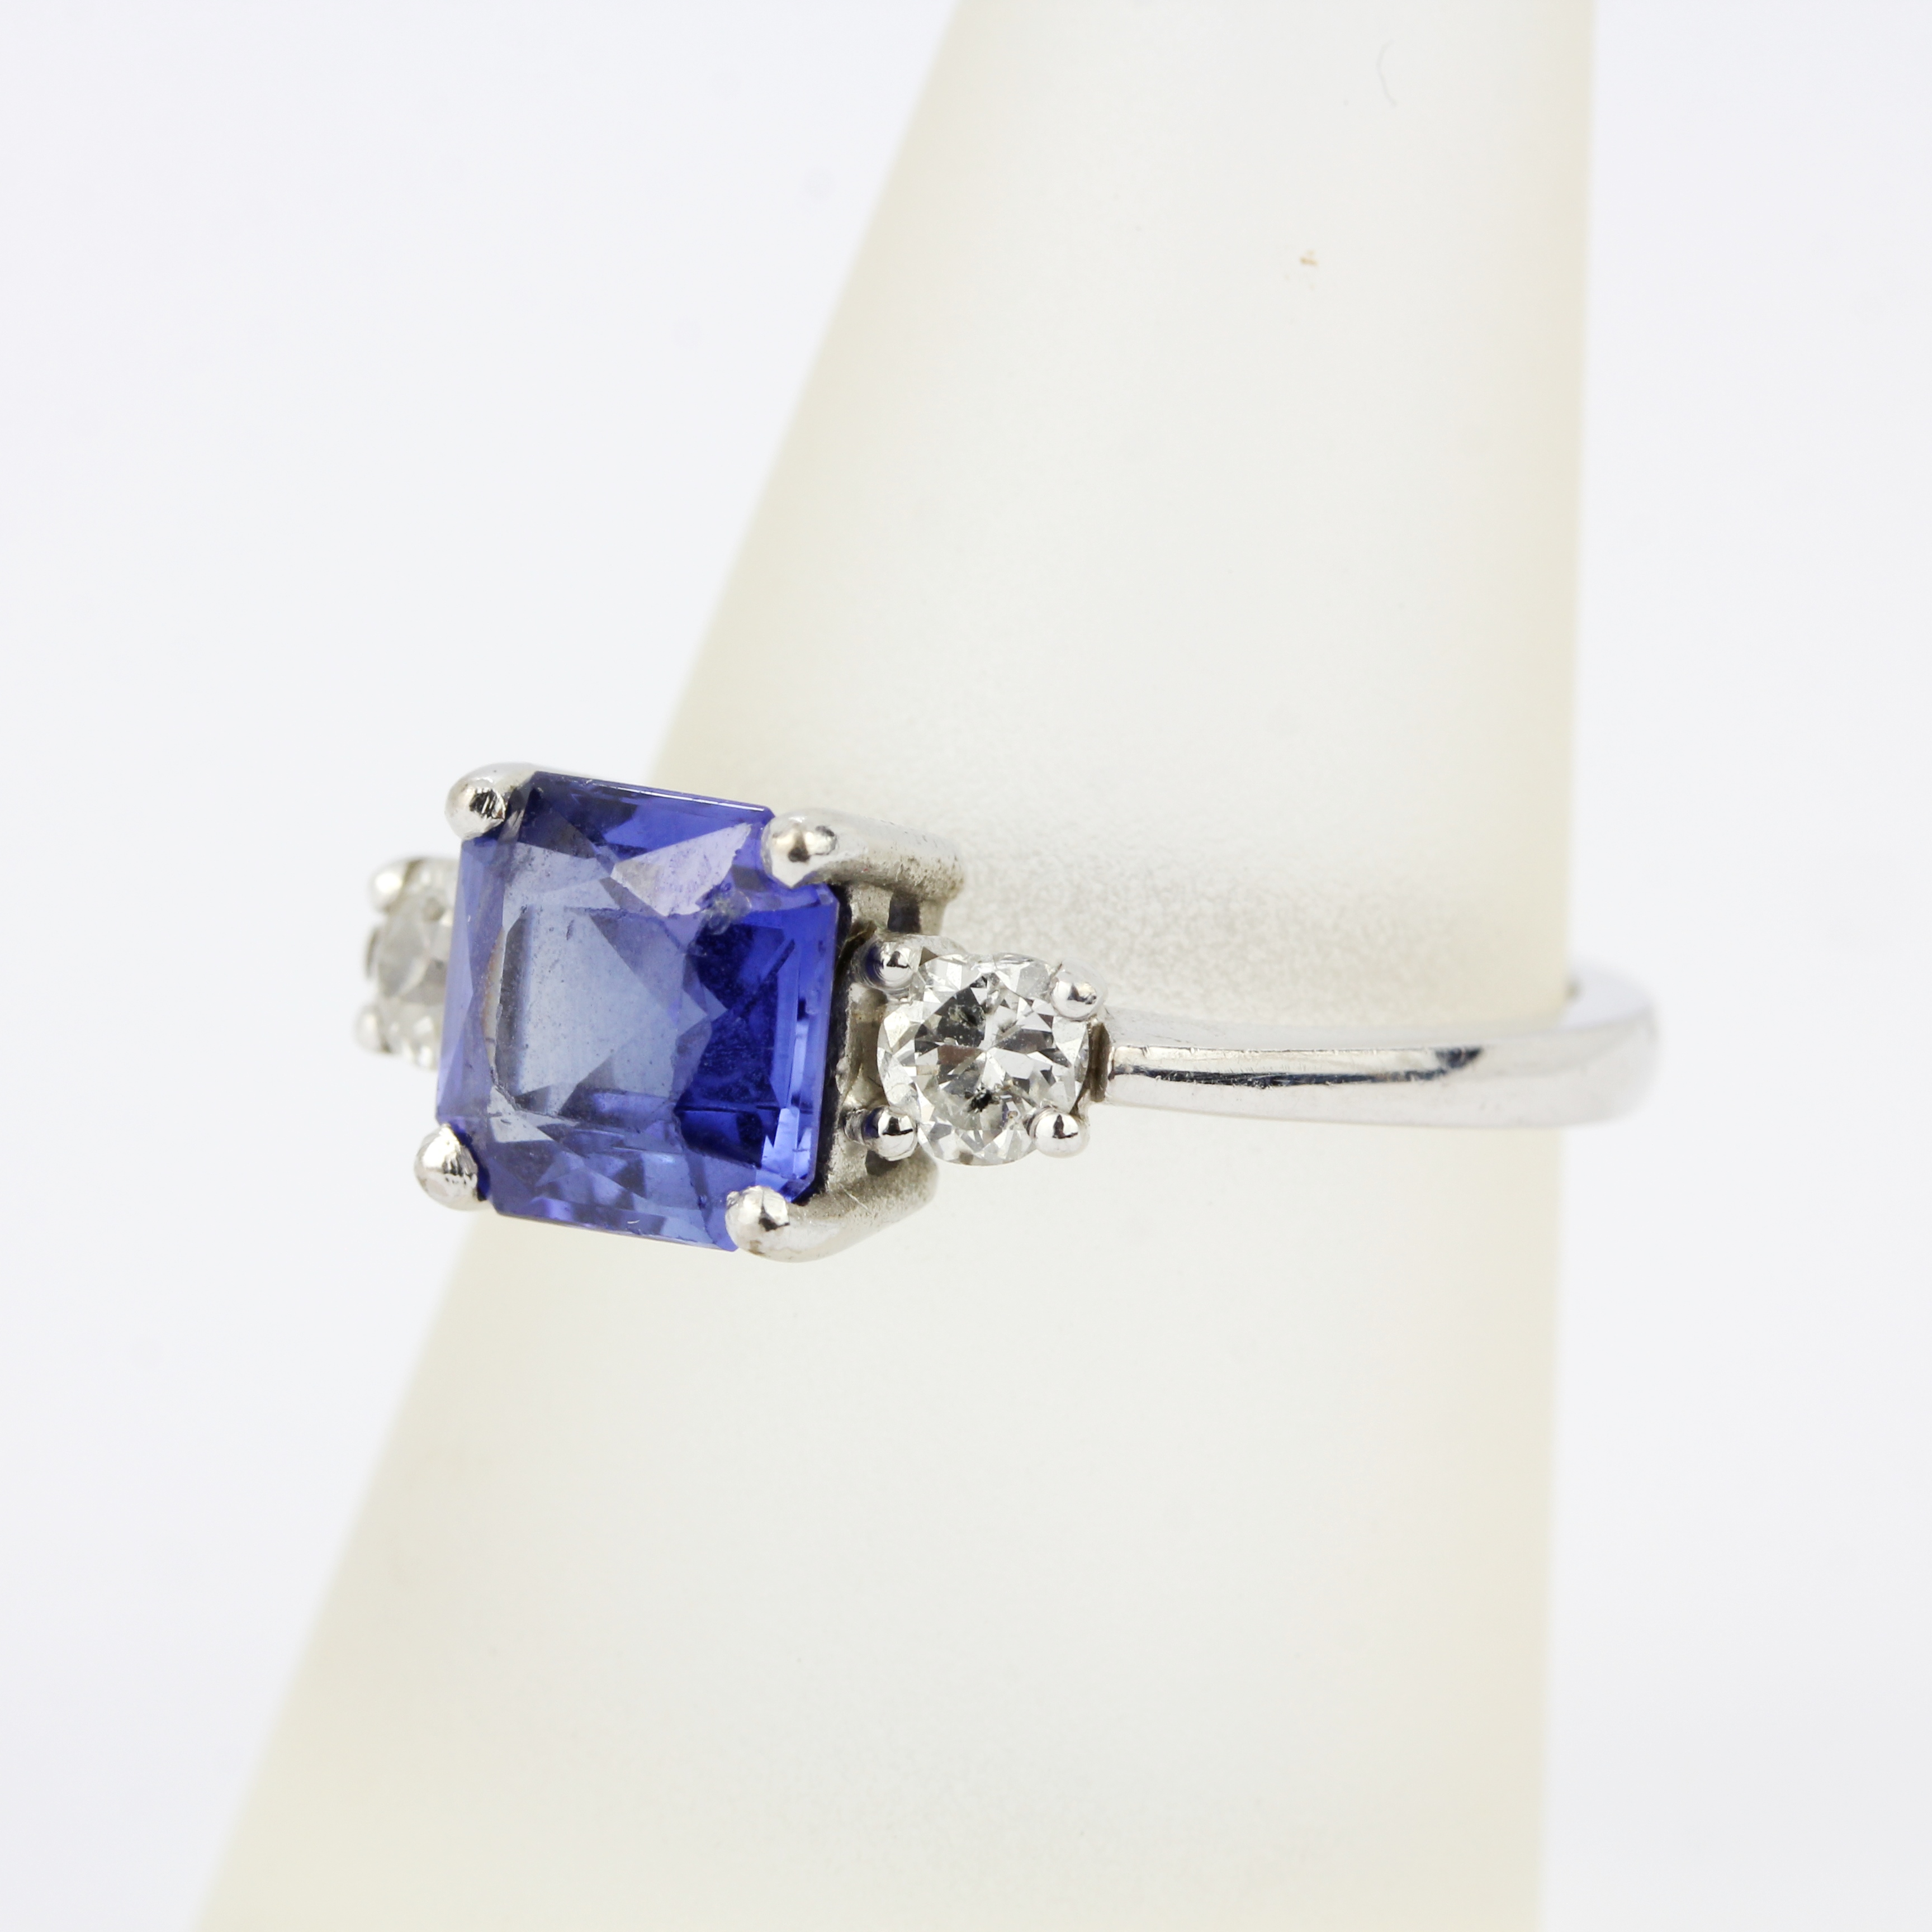 An 18ct white gold ring set with a fancy cut sapphire flanked by brilliant cut diamonds, diamonds - Image 2 of 4